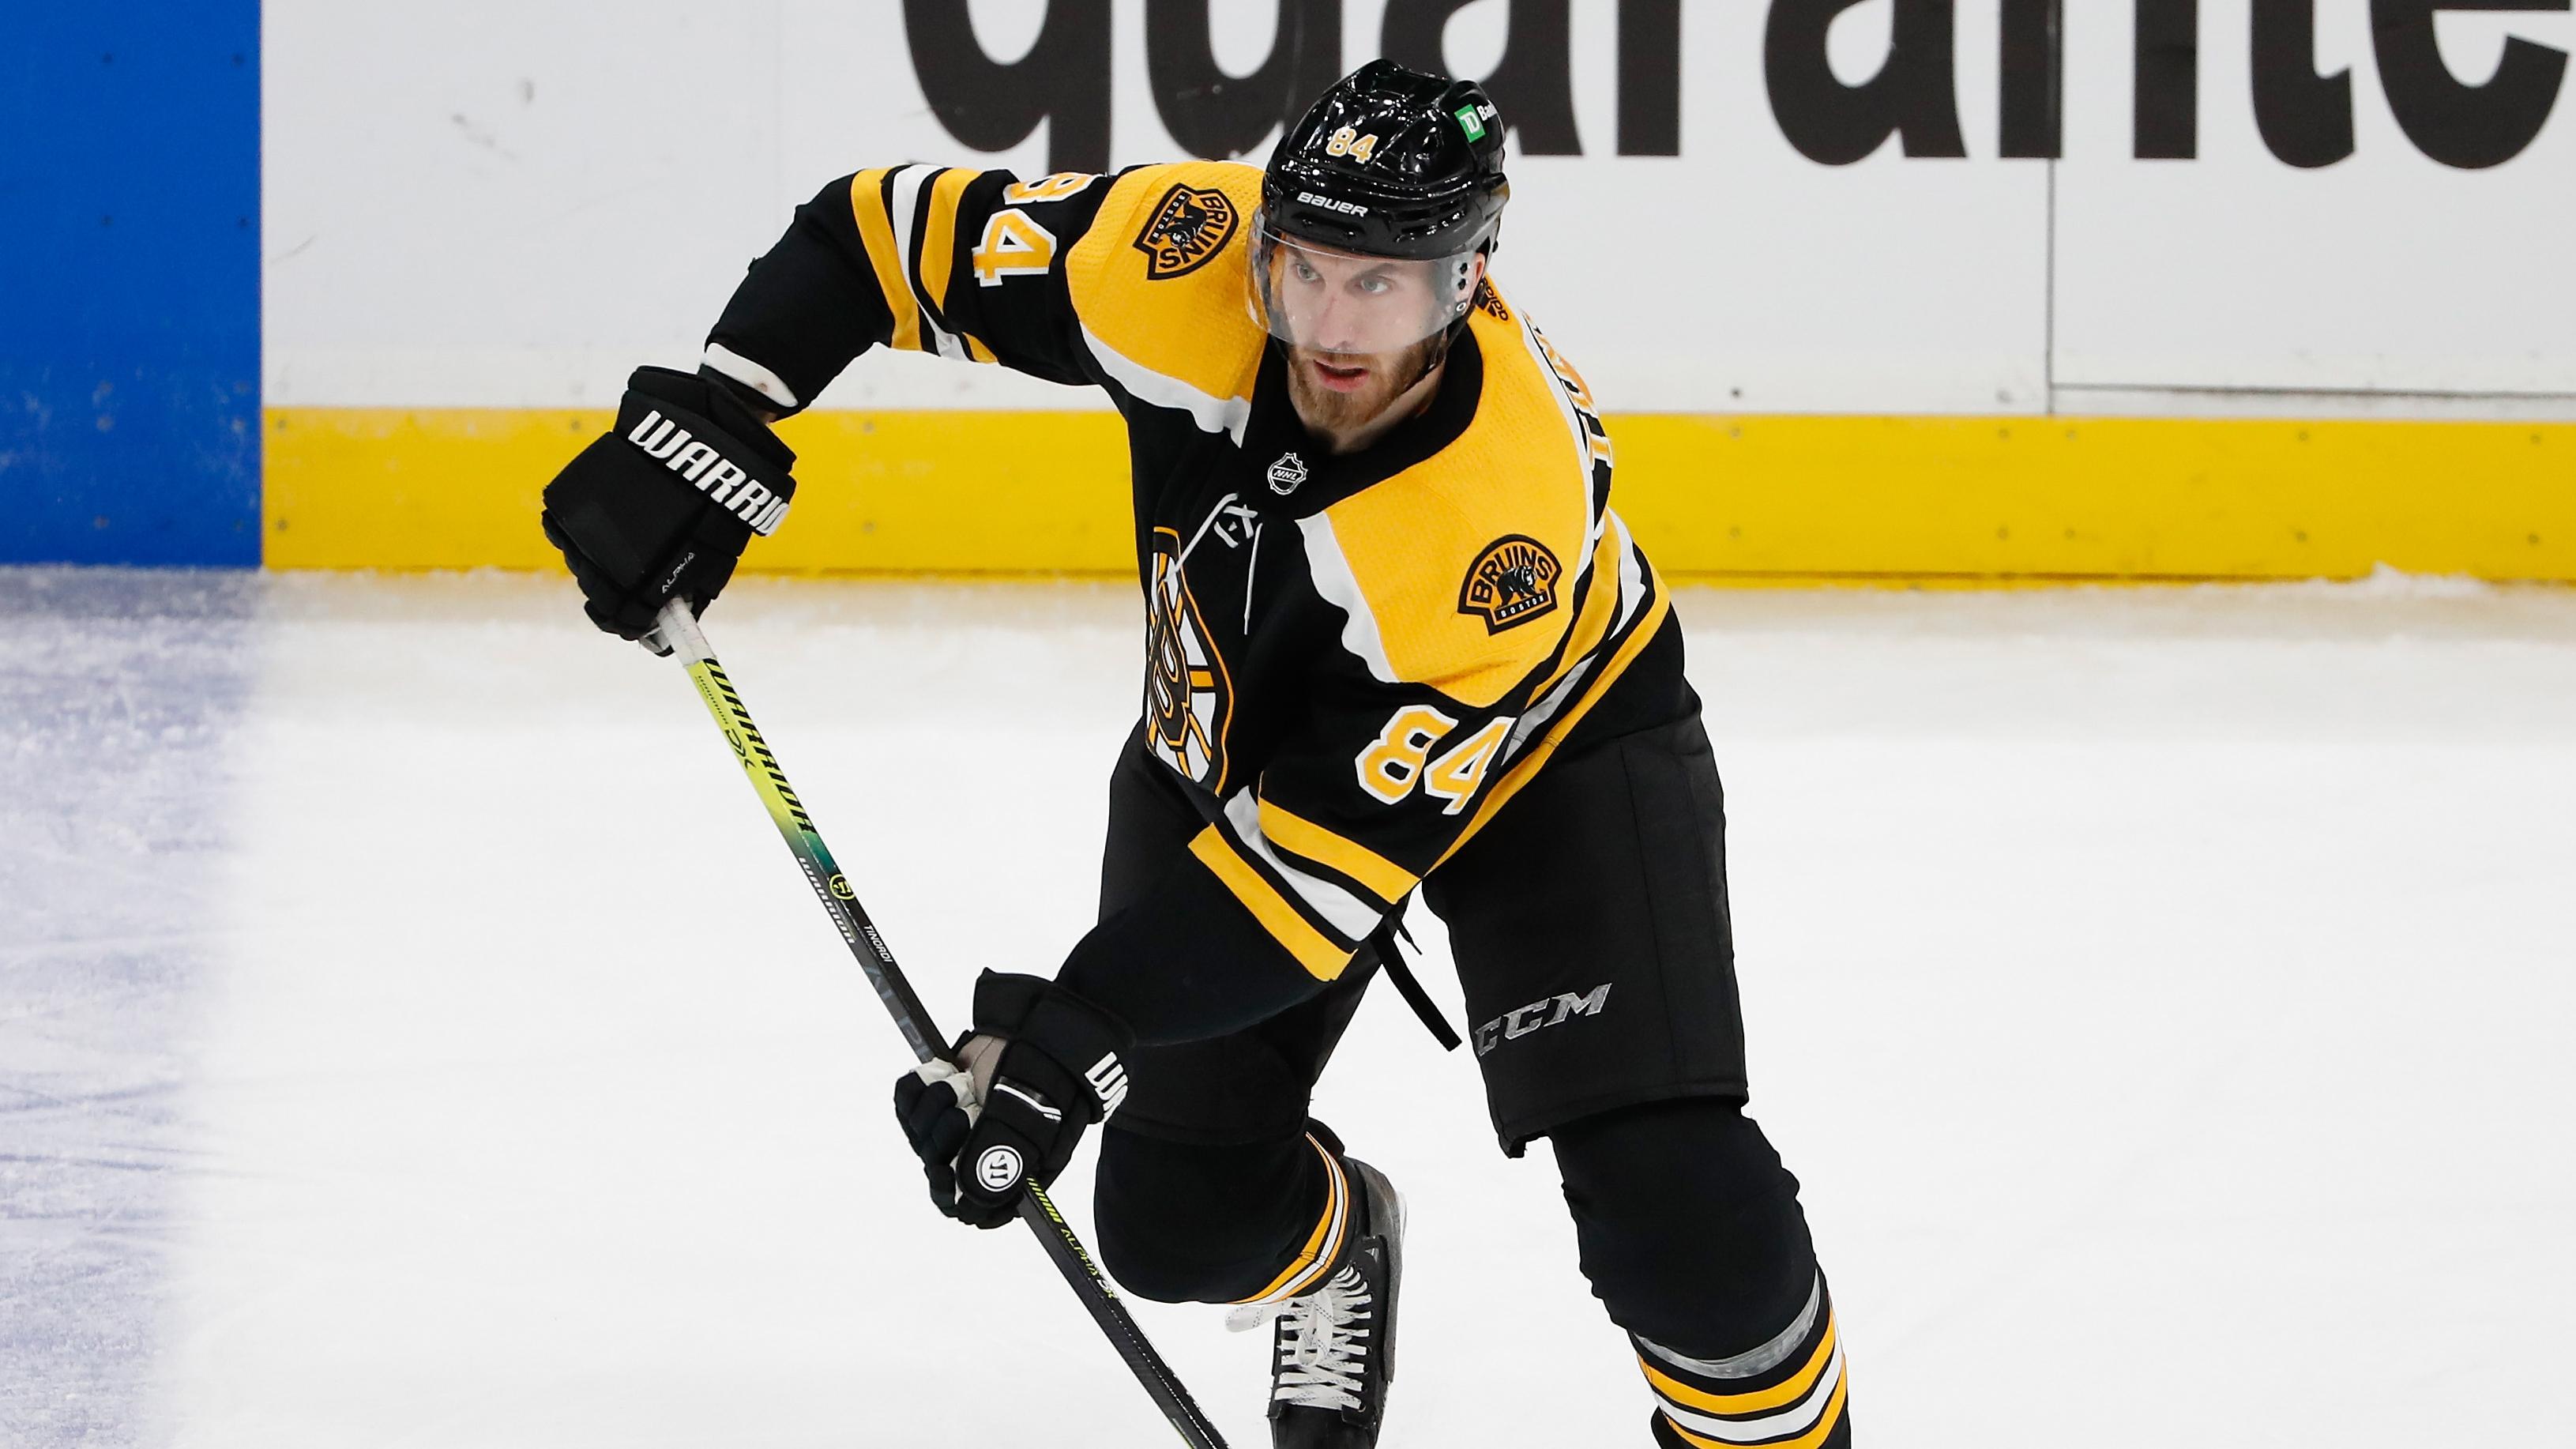 Mar 7, 2021; Boston, Massachusetts, USA; Boston Bruins defenseman Jarred Tinordi (84) during the second period against the New Jersey Devils at TD Garden. / Winslow Townson-USA TODAY Sports